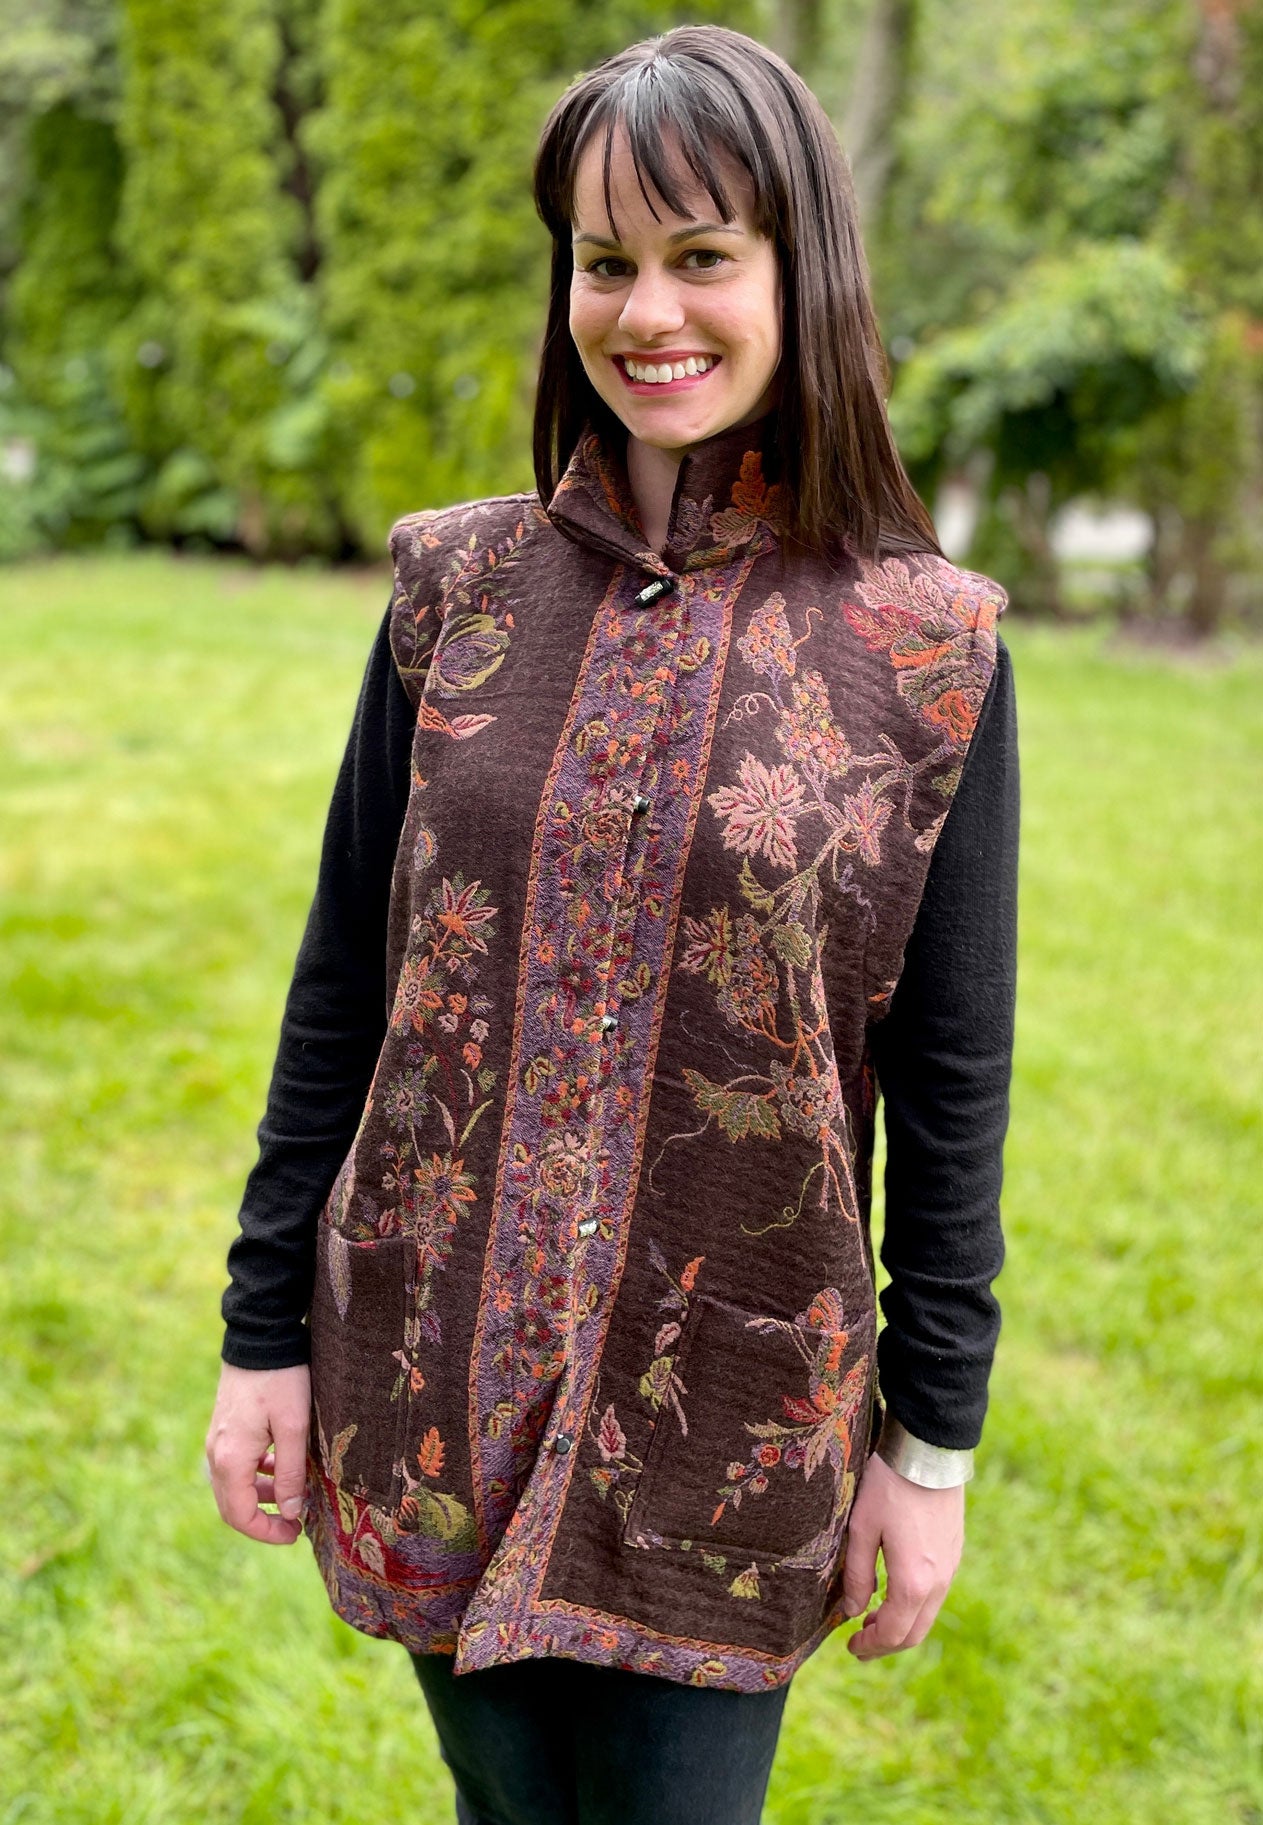 Ladies Mandarin Collar Boiled Wool Imperial Vest with Pockets in Copper color FREE complimentary Storage Bag